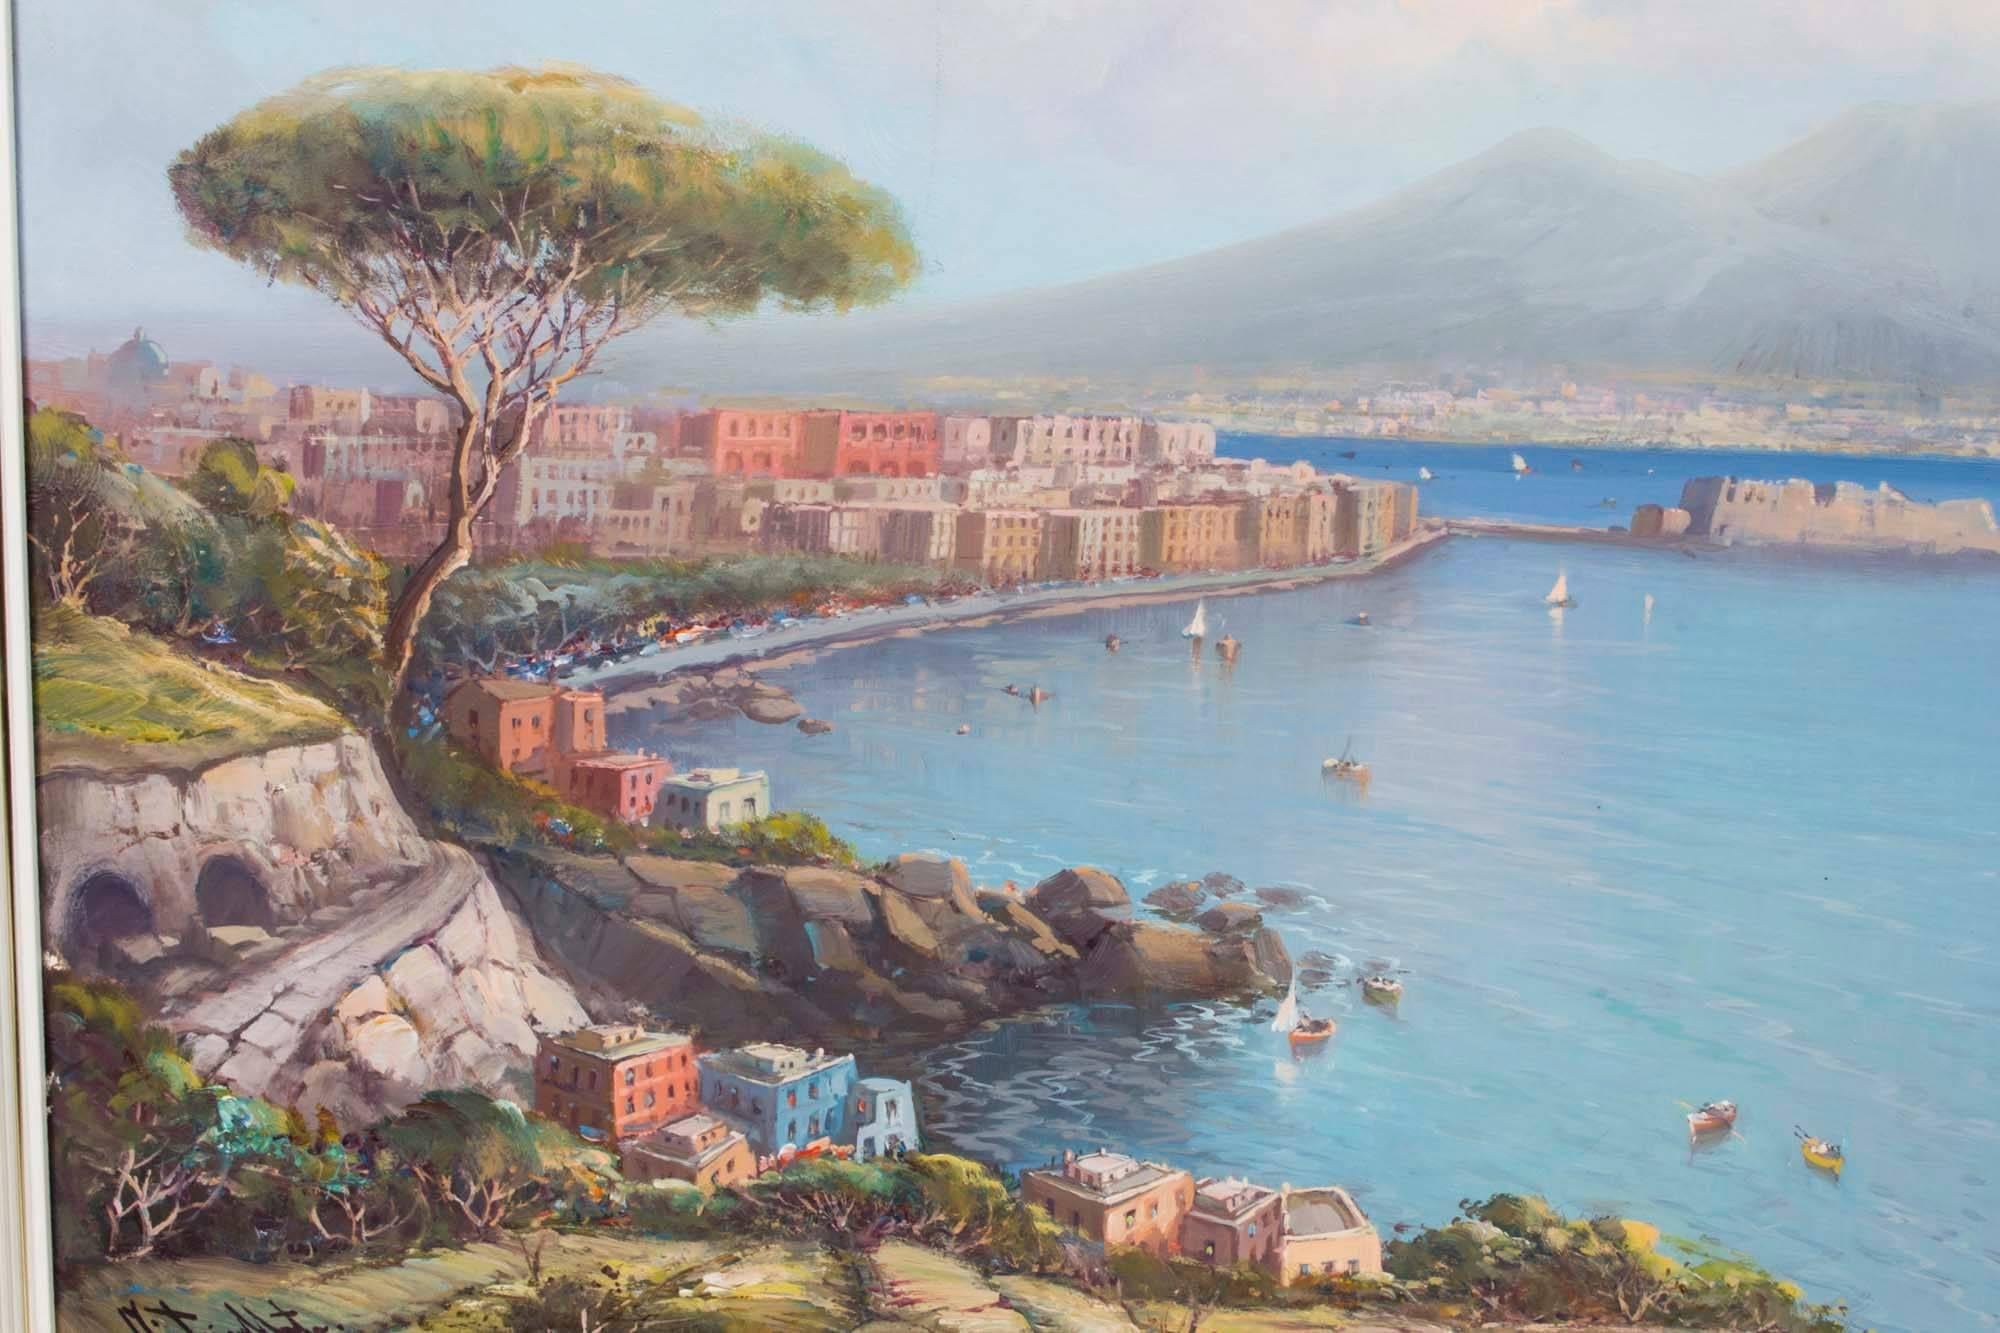 bay of naples painting meaning